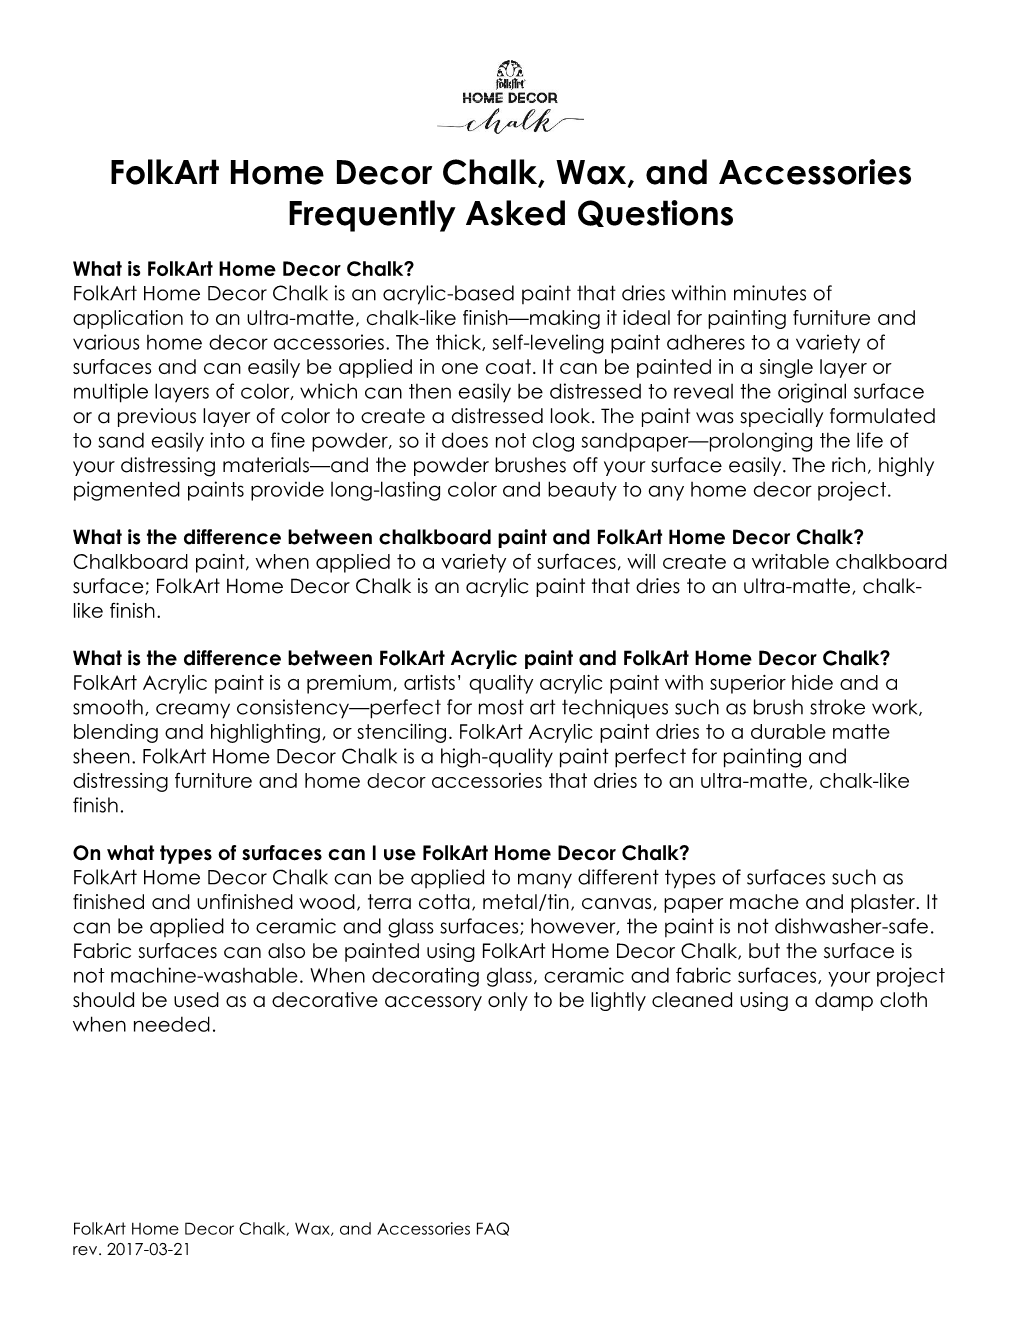 Folkart Home Decor Chalk, Wax, and Accessories Frequently Asked Questions